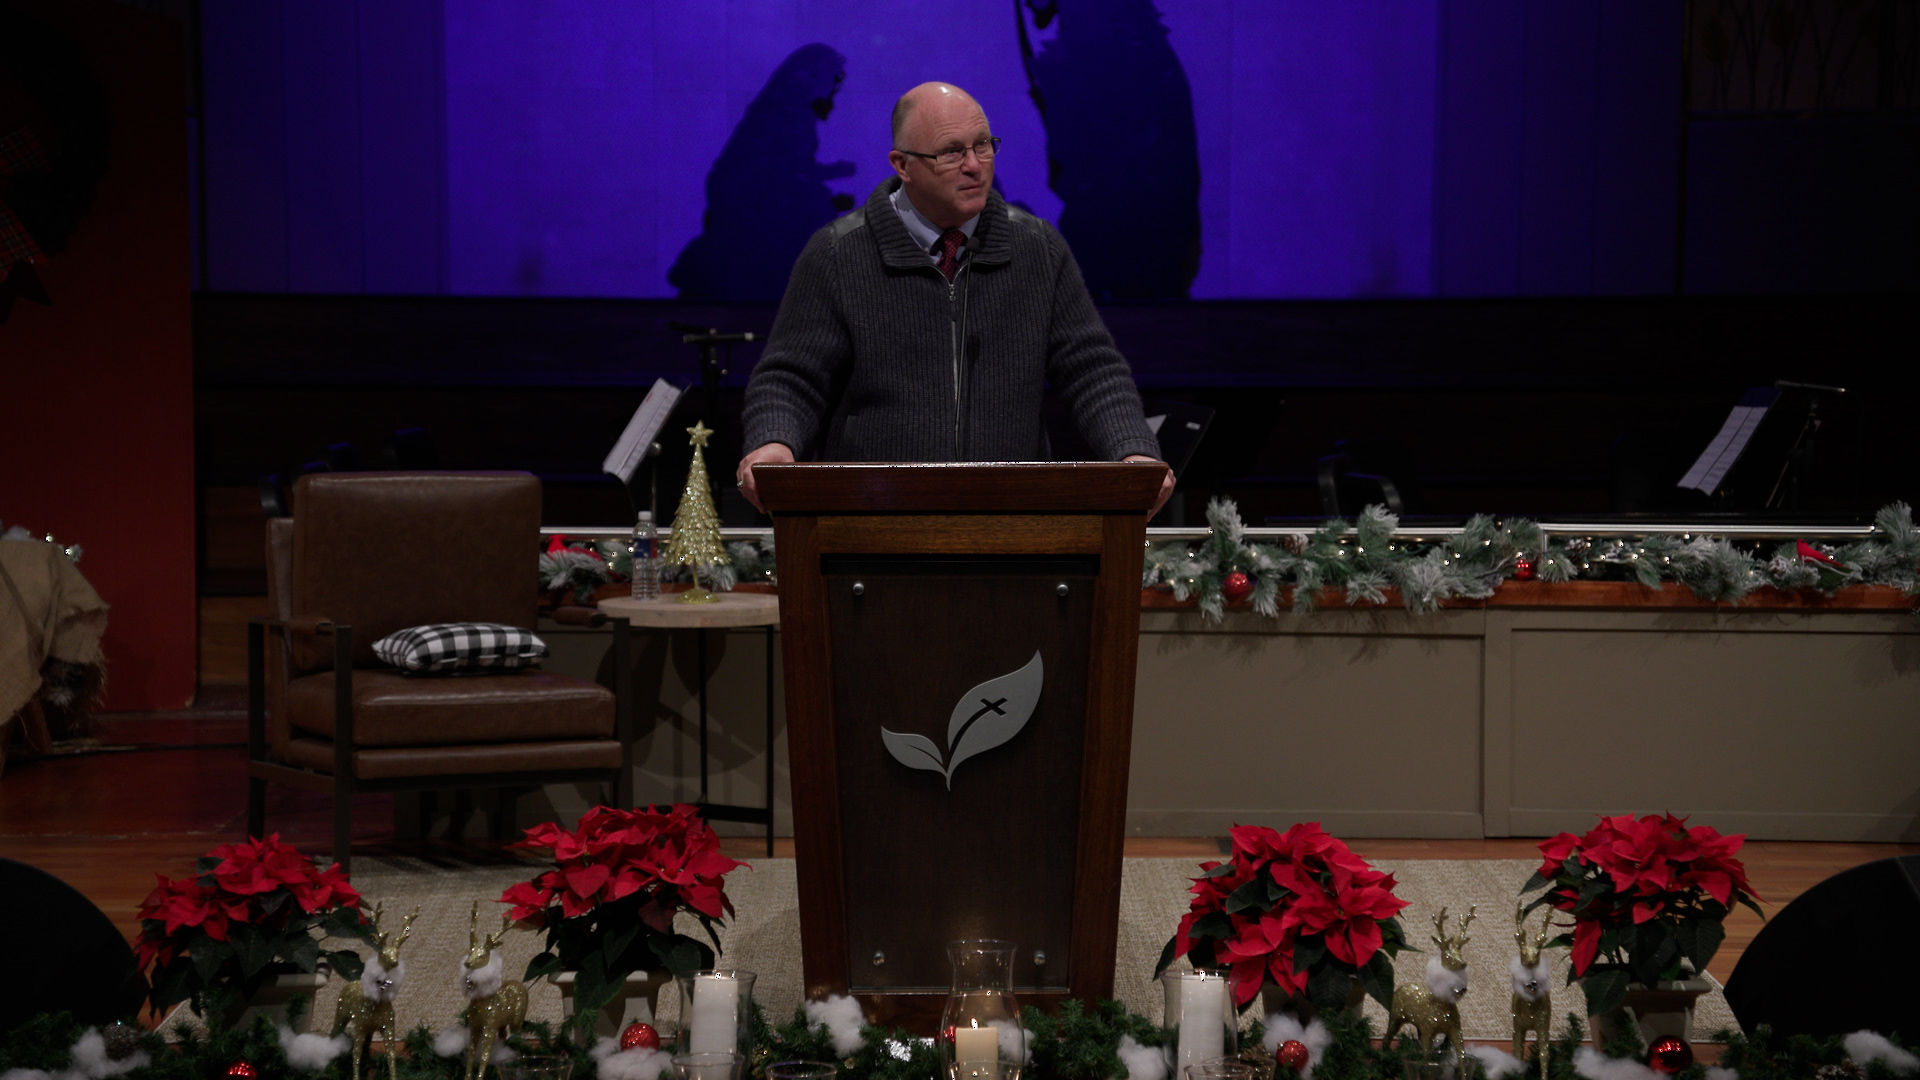 Pastor Paul Chappell: The Perfect Gift